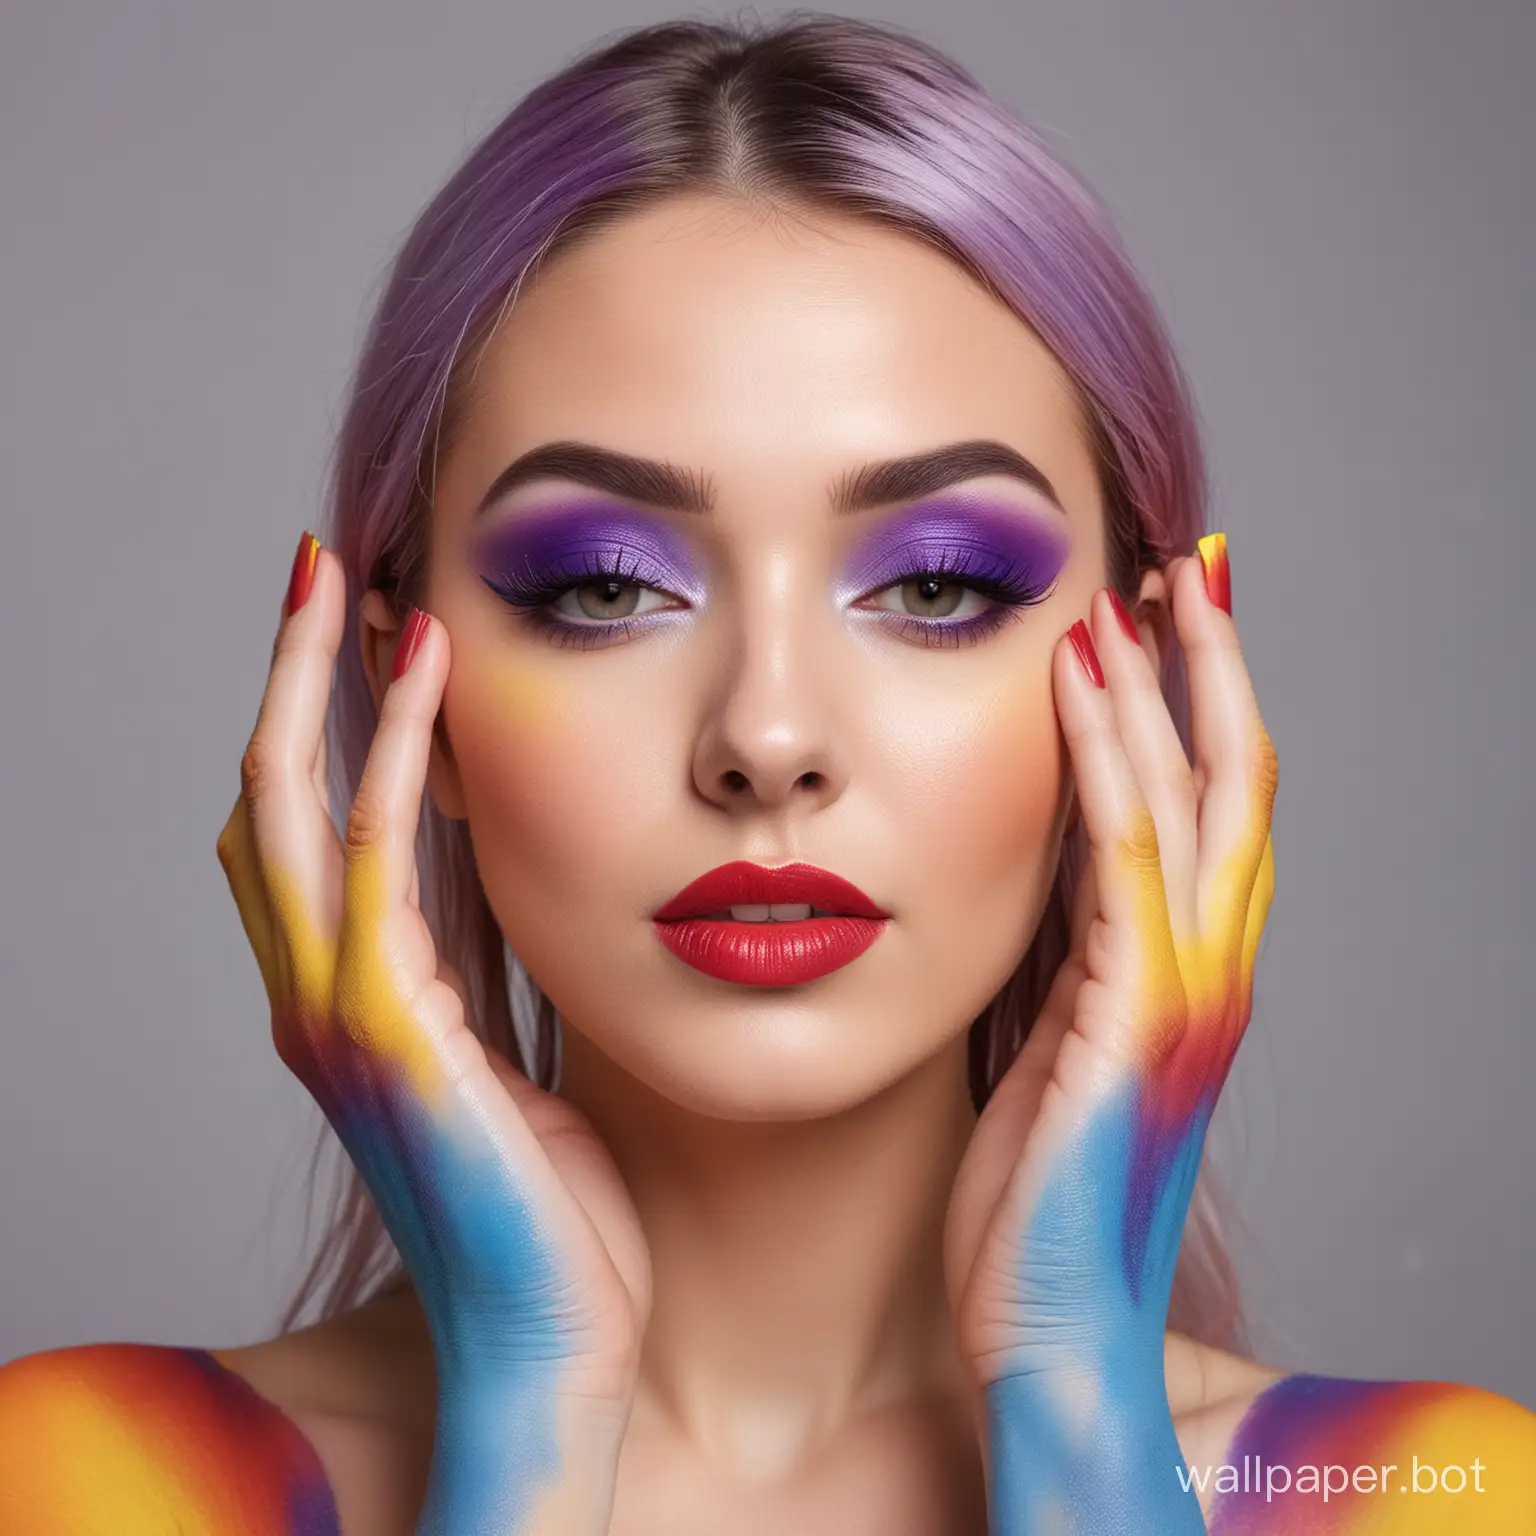 woman with blue,red,purple and yellow make up , she is touching her face with her hands, more backgrond space